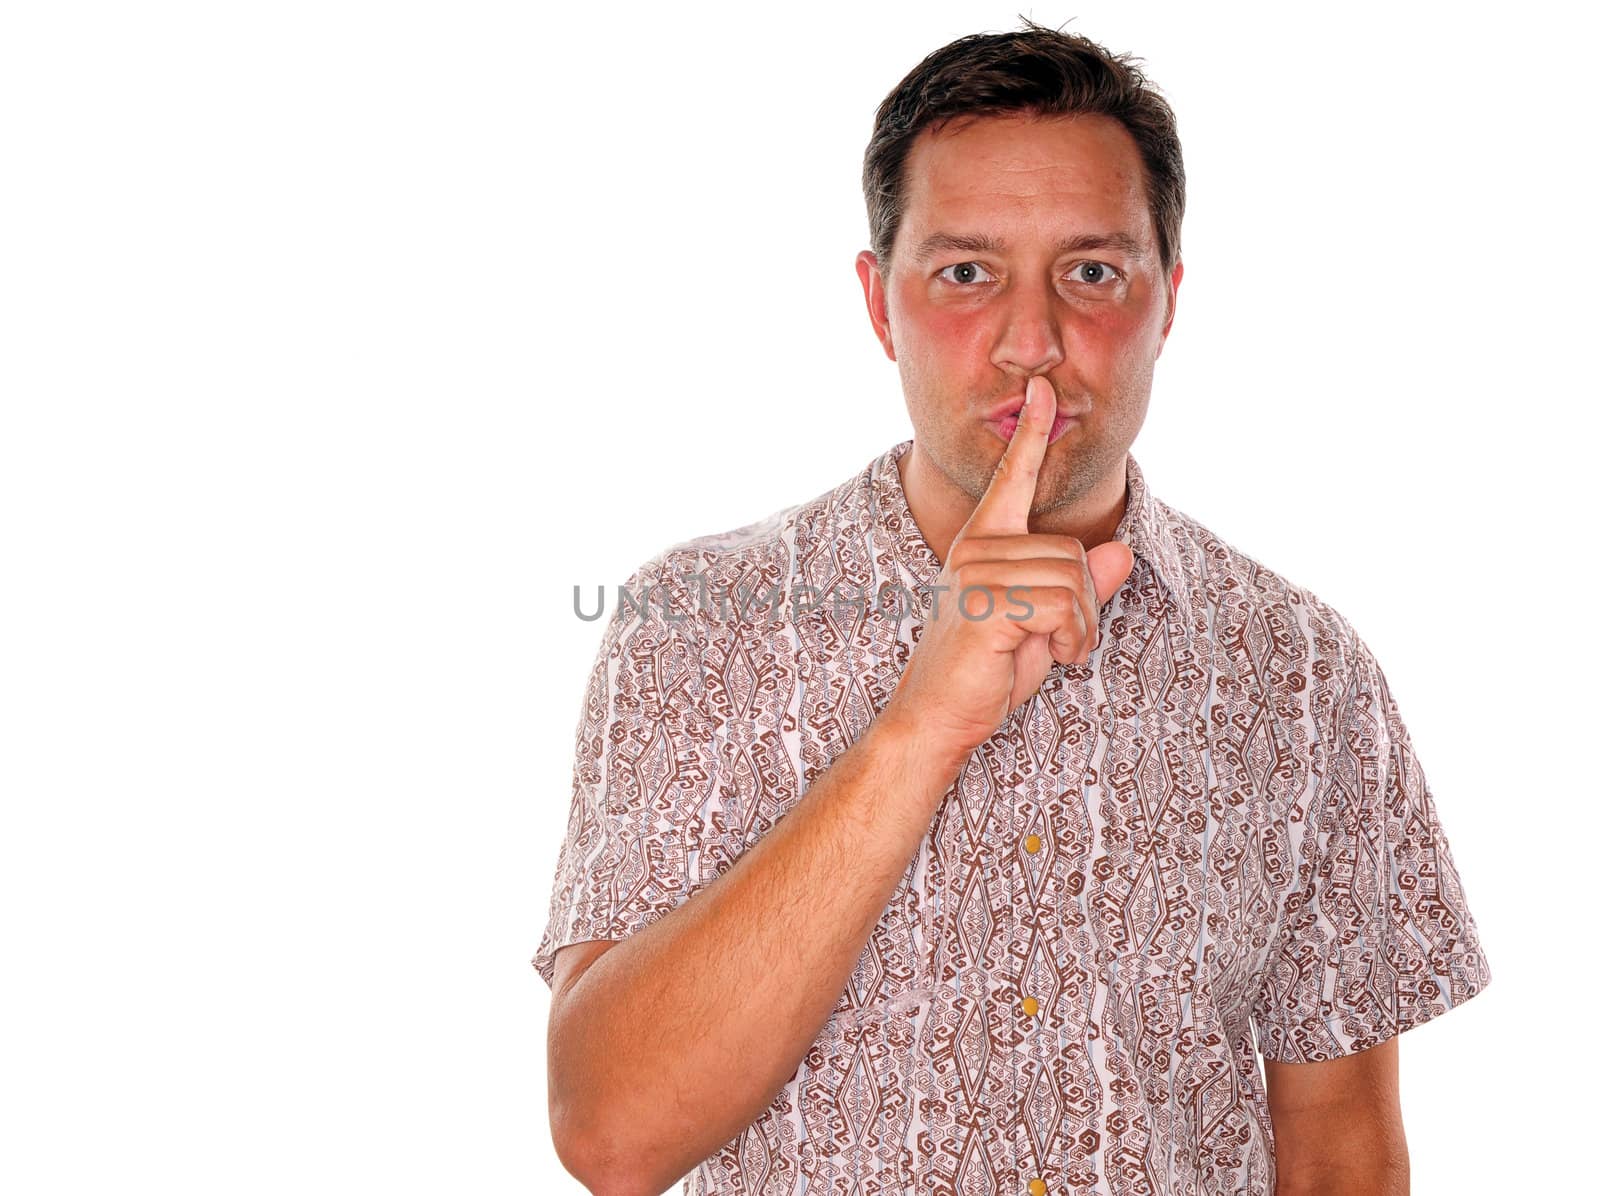 A young man gesturing to keep something confidential